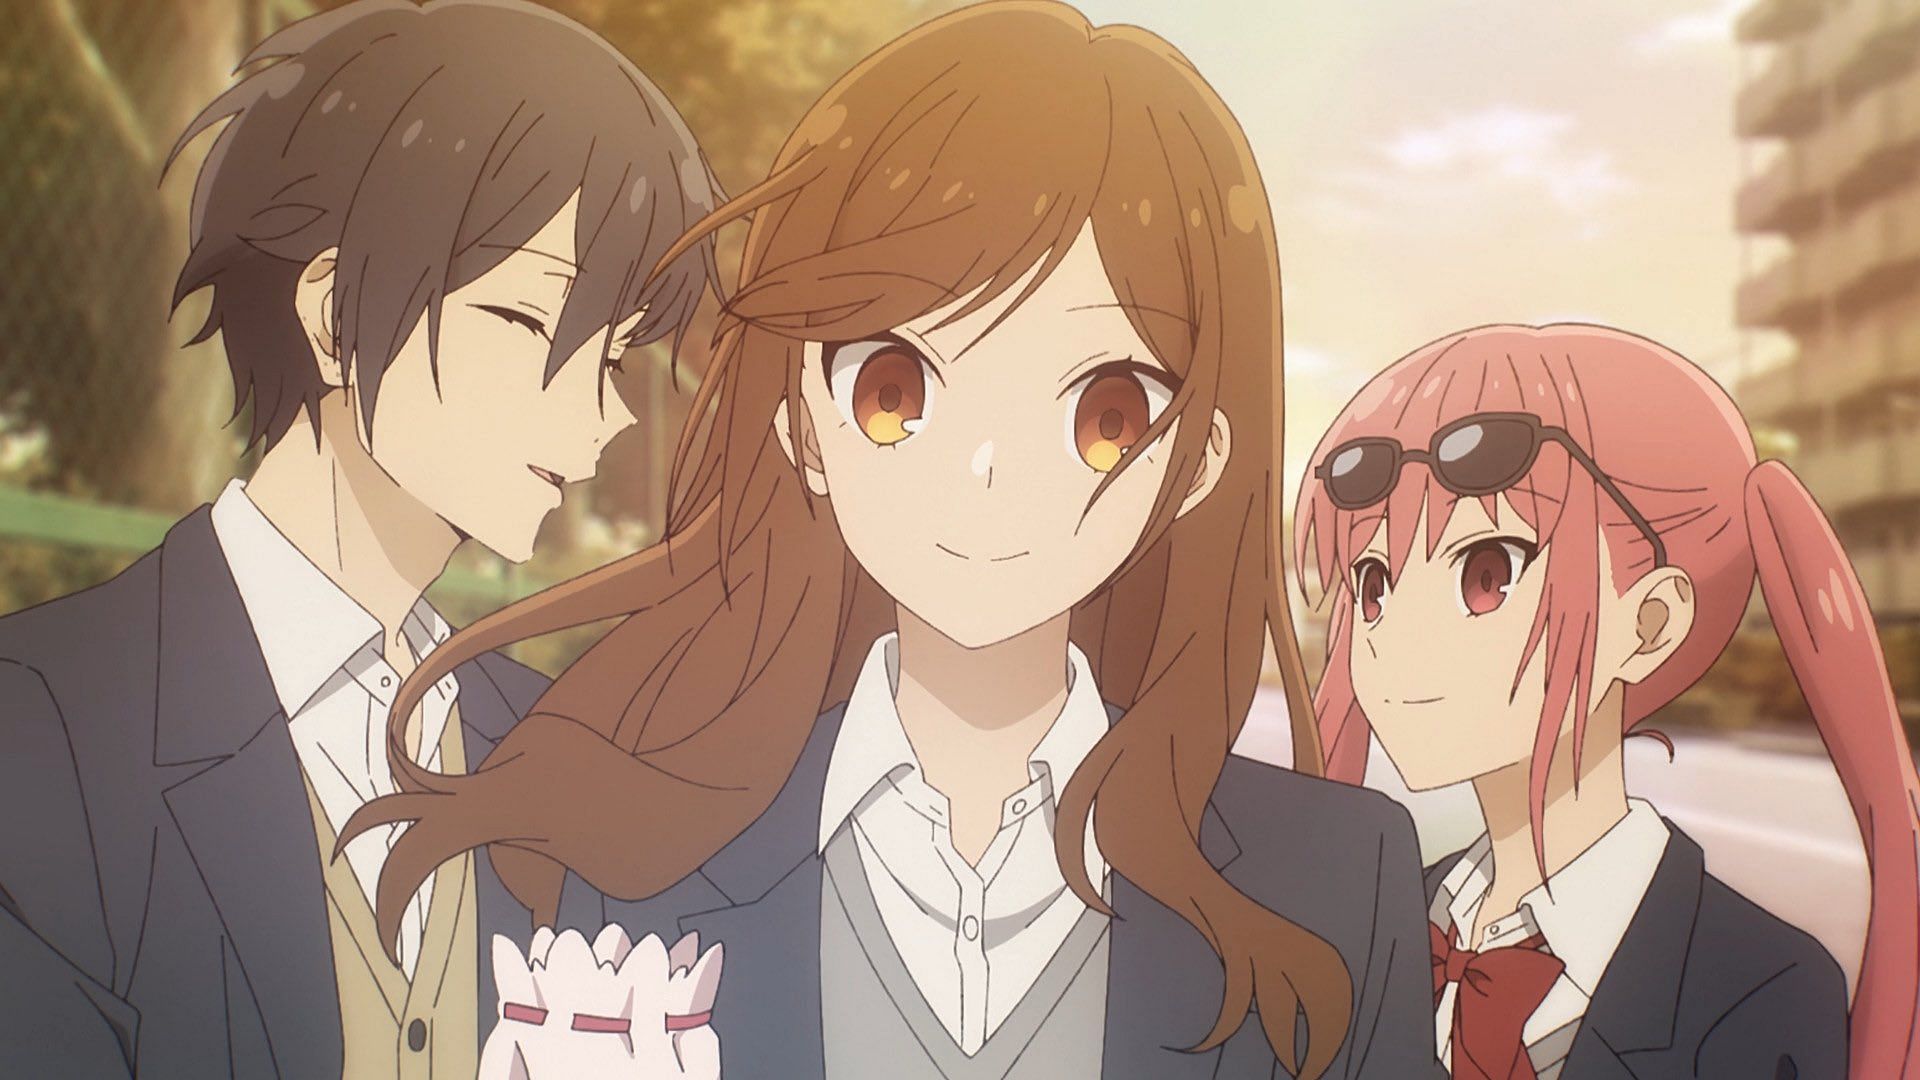 Horimiya: The Missing Pieces Episode 6 Release Date And Time